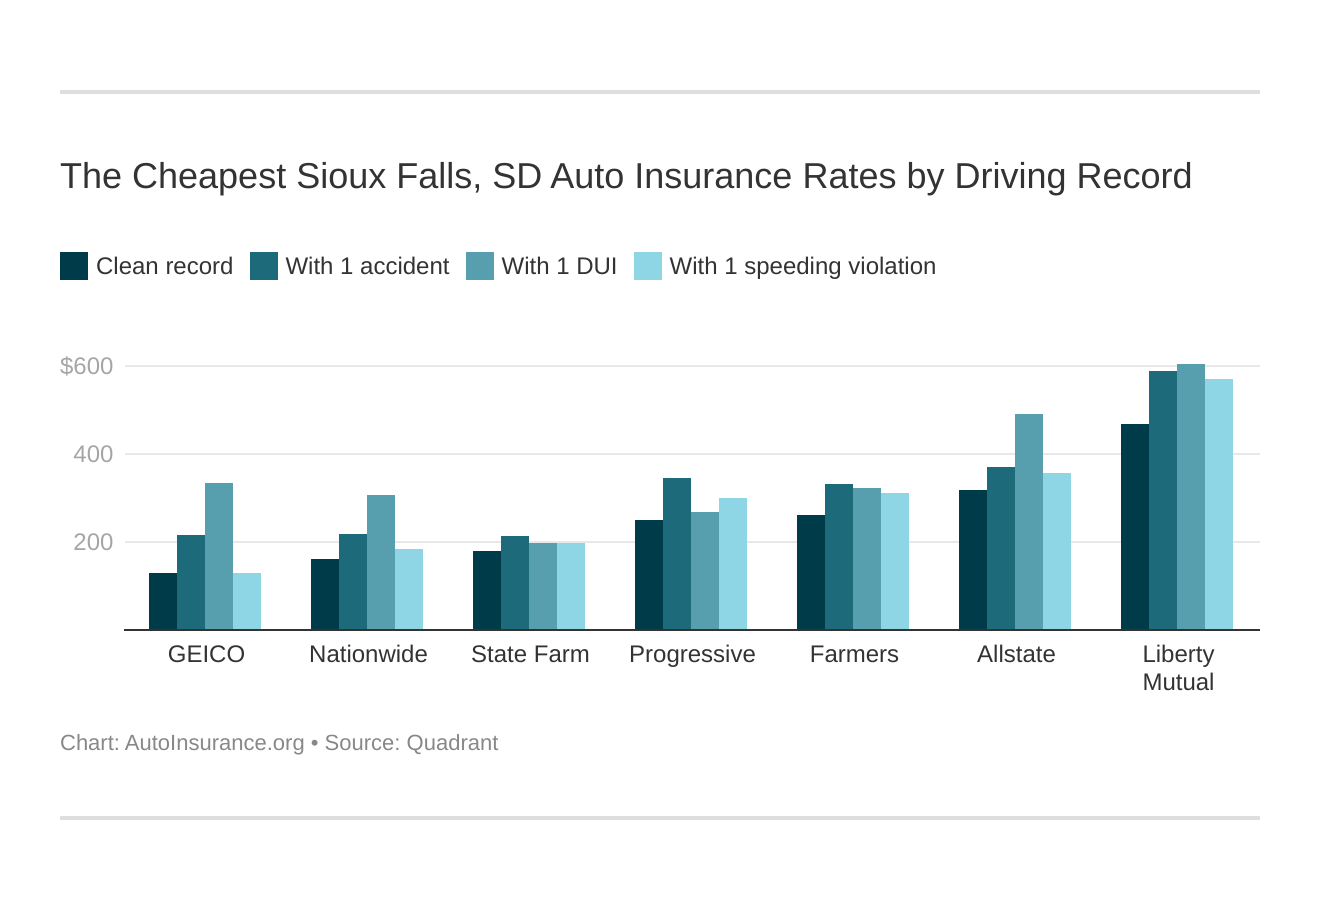 The Cheapest Sioux Falls, SD Auto Insurance Rates by Driving Record